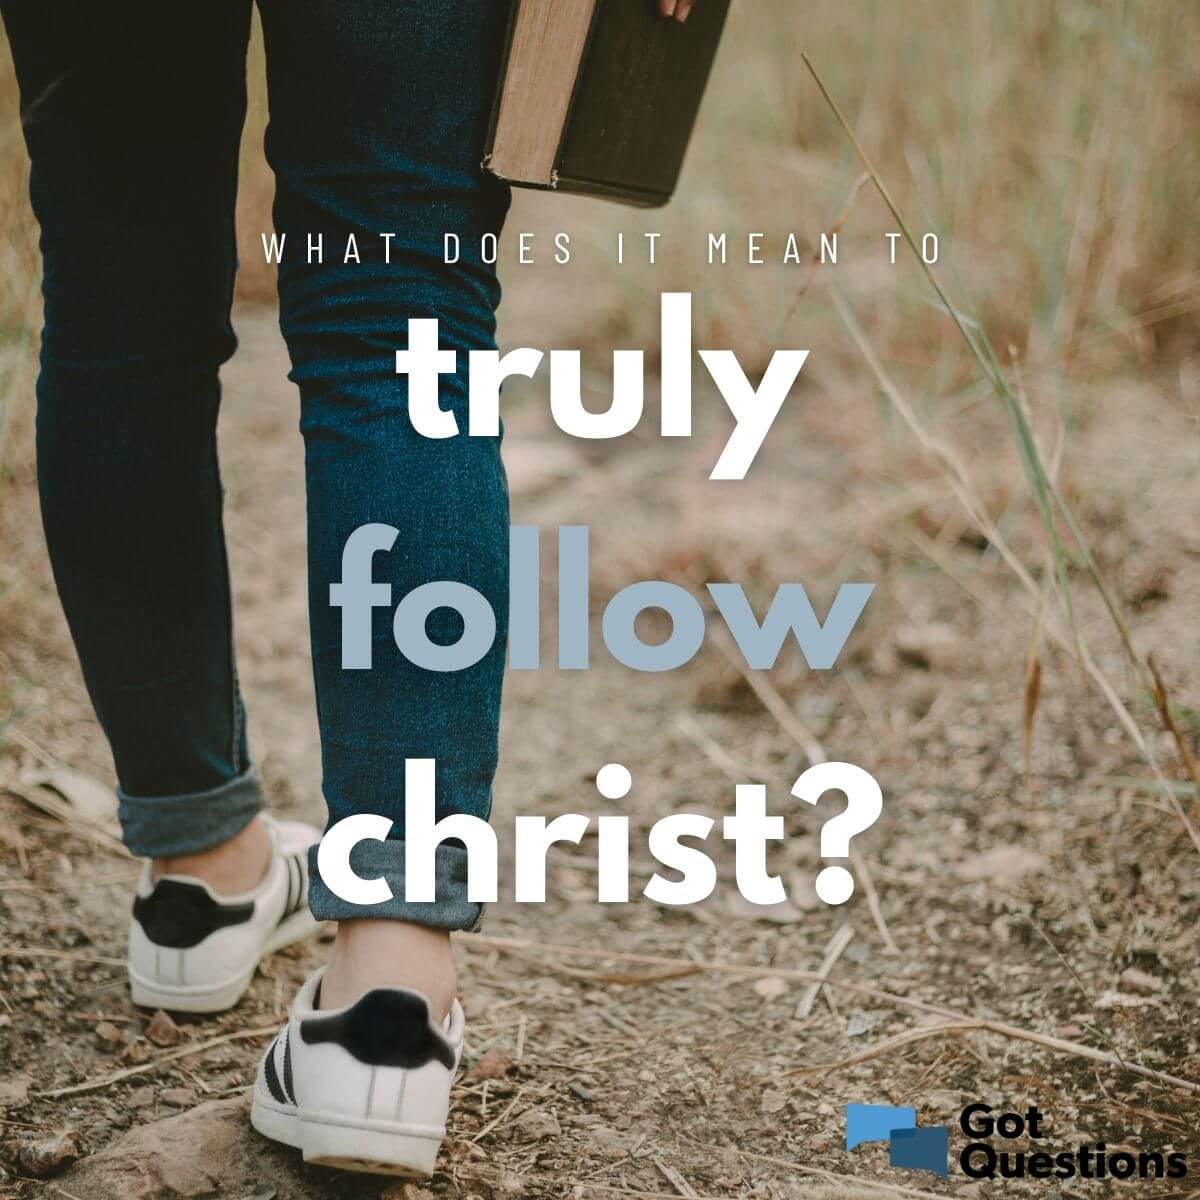 follow christ does mean truly gotquestions og